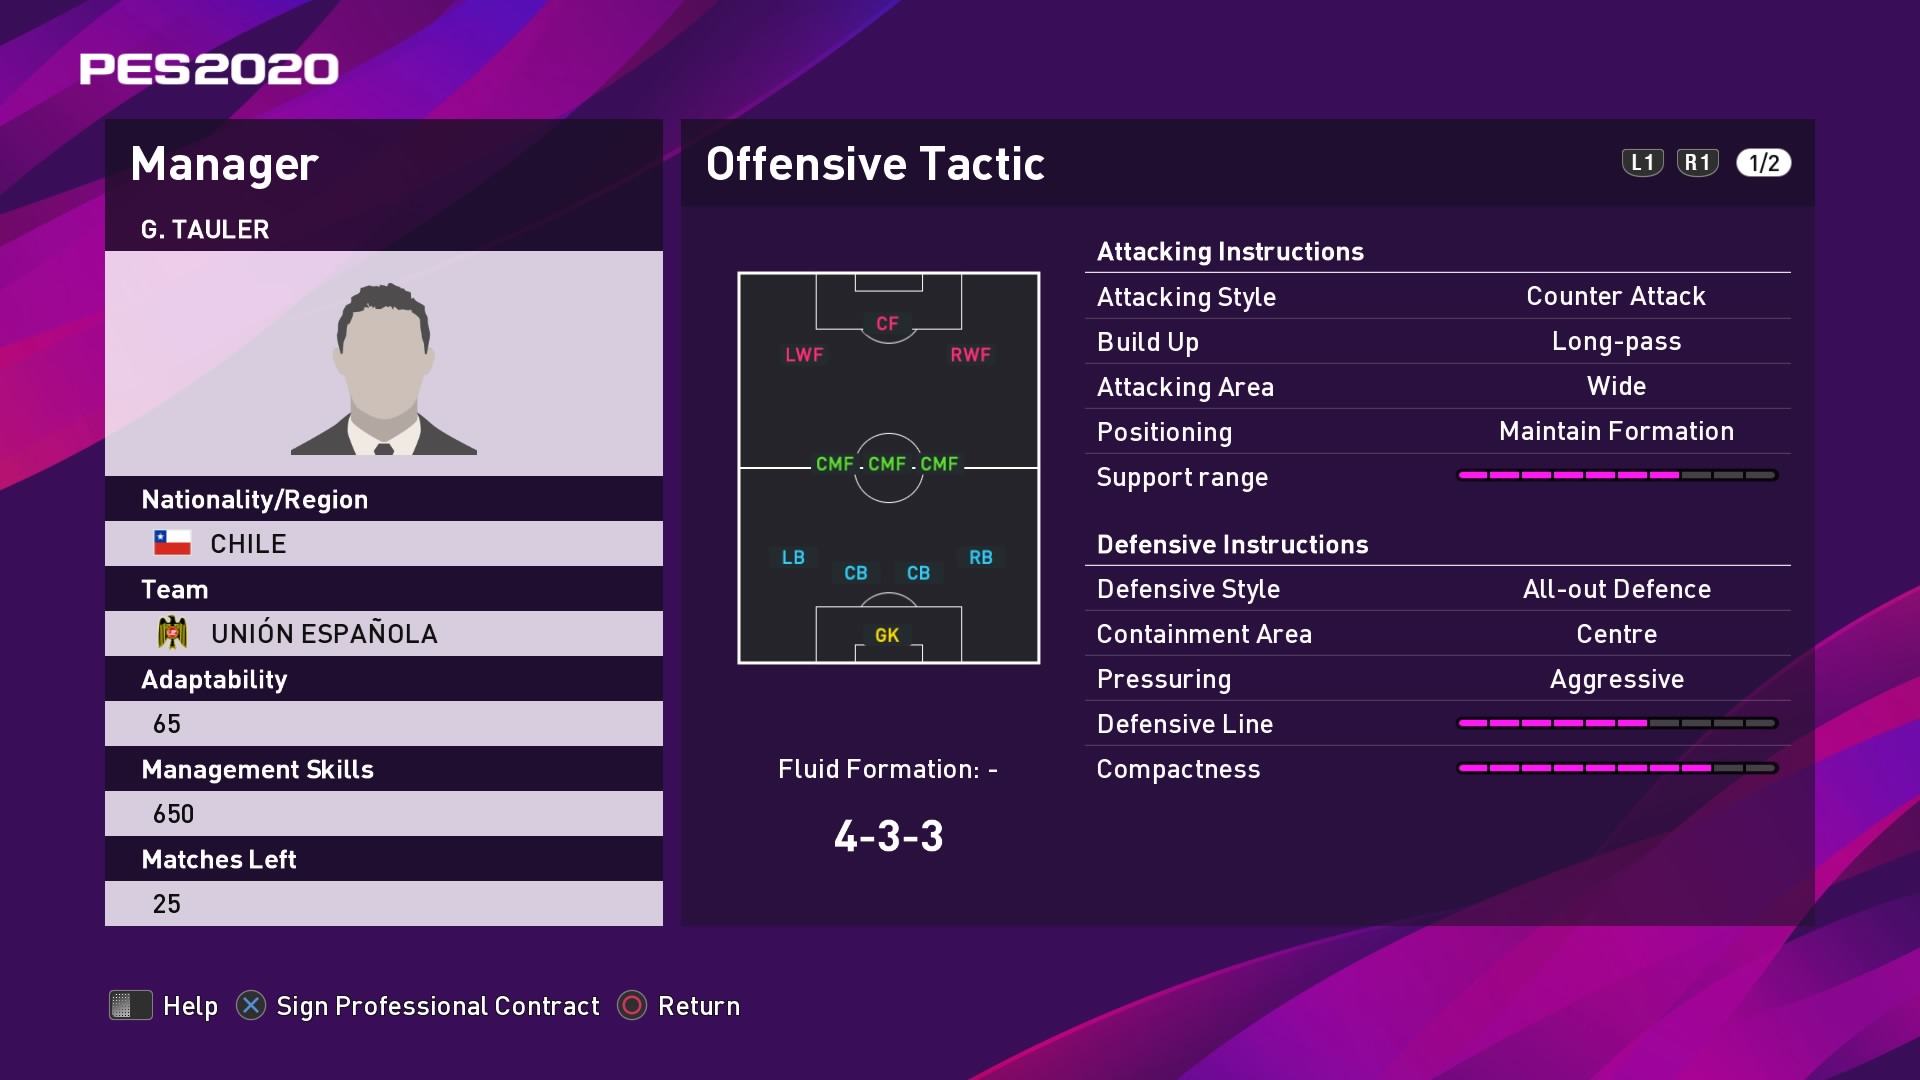 G. Tauler (Ronald Fuentes) Offensive Tactic in PES 2020 myClub